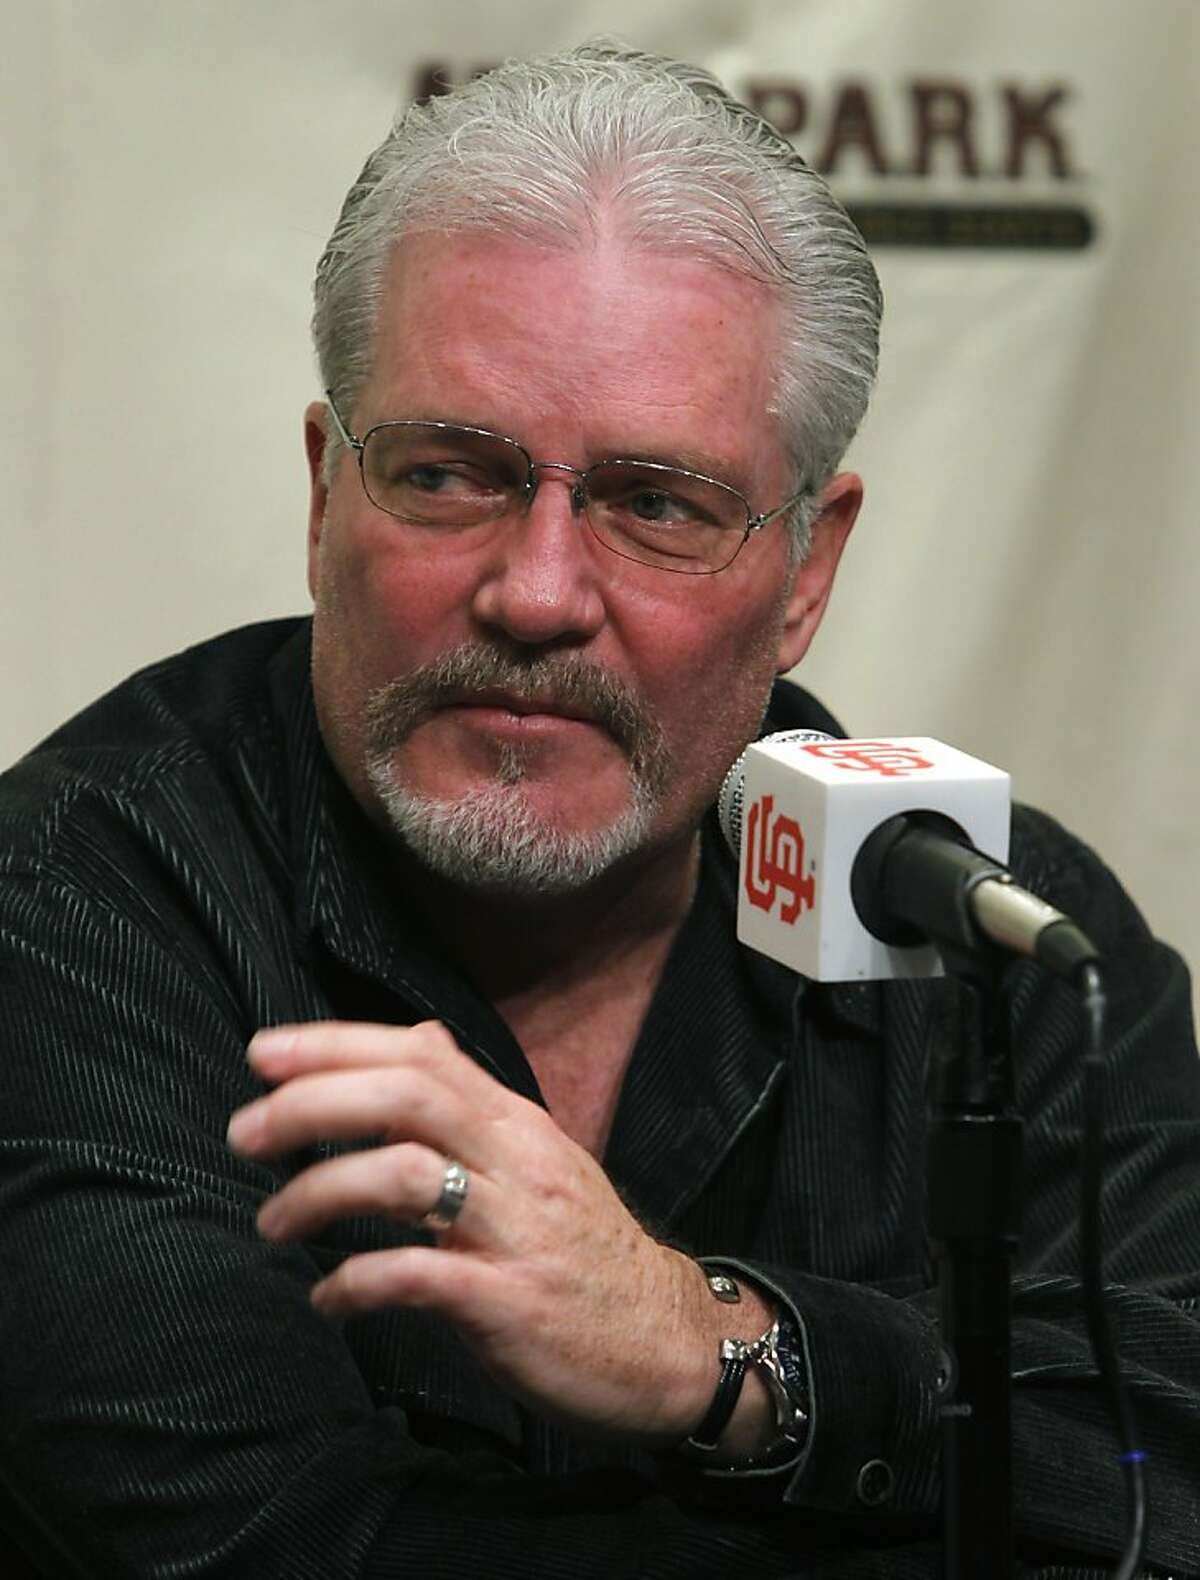 Giants general manager Brian Sabean discusses the team's off-season plans after its World Series championship at AT&T Park in San Francisco, Calif., on Friday, Nov. 5, 2010.